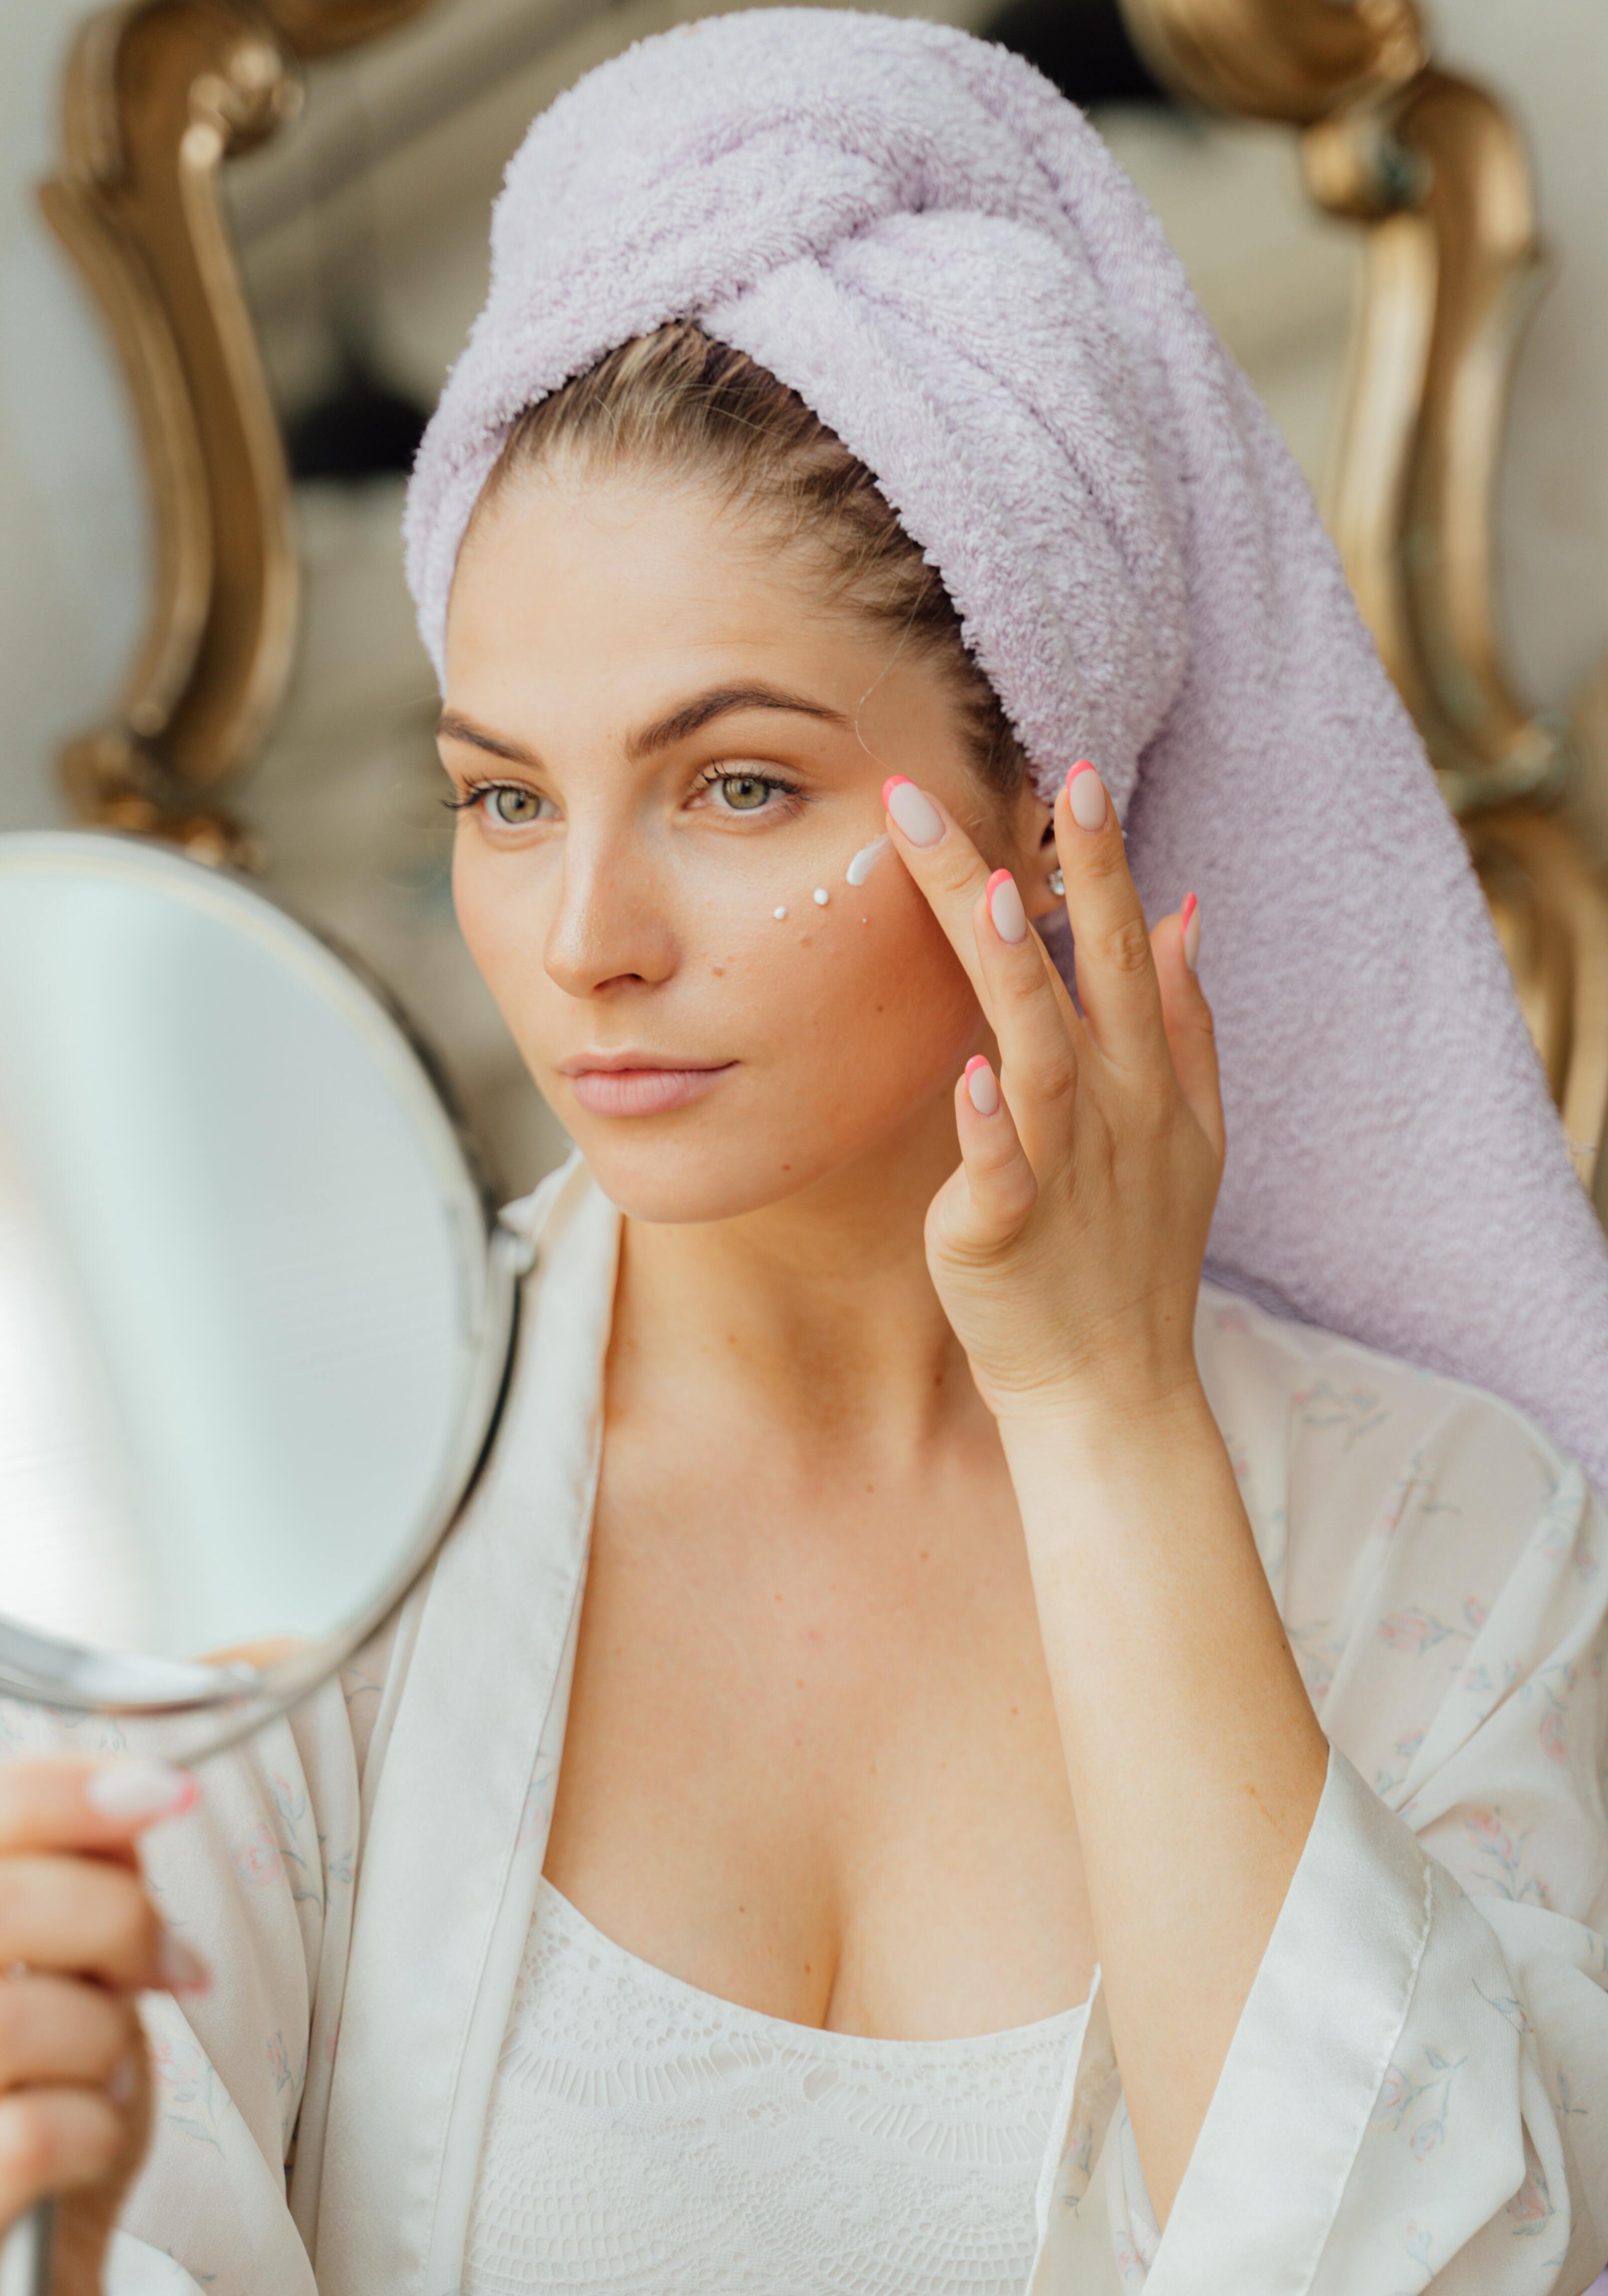 A woman looking into a hand mirror and applying primer on her face